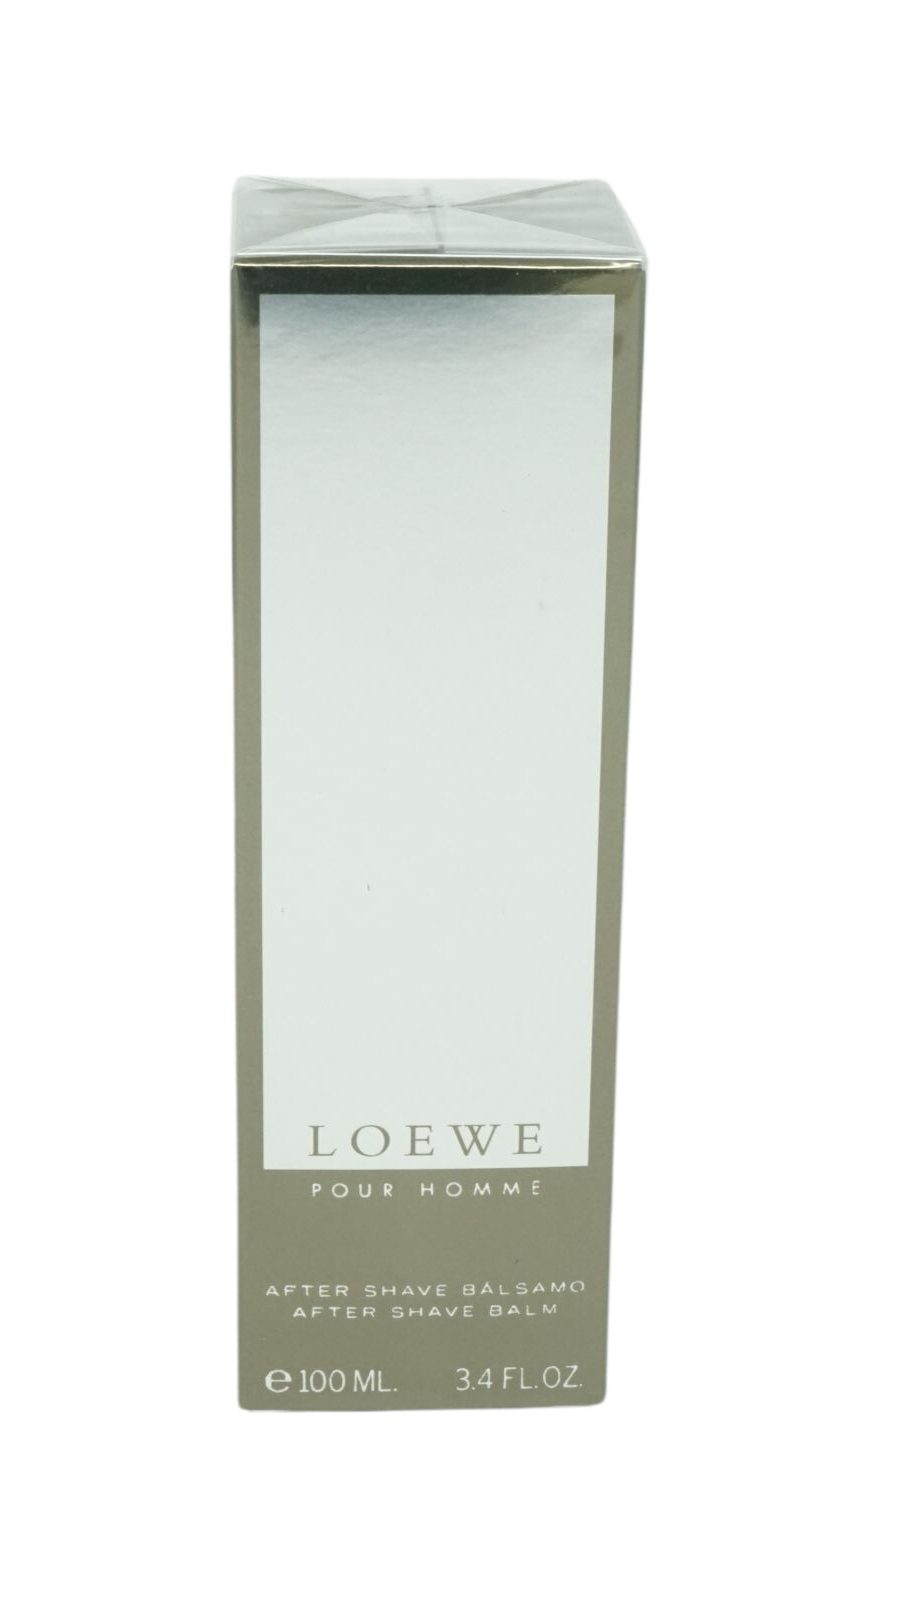 Loewe After-Shave Loewe Pour Shave Homme After Balsam 100ml Balm